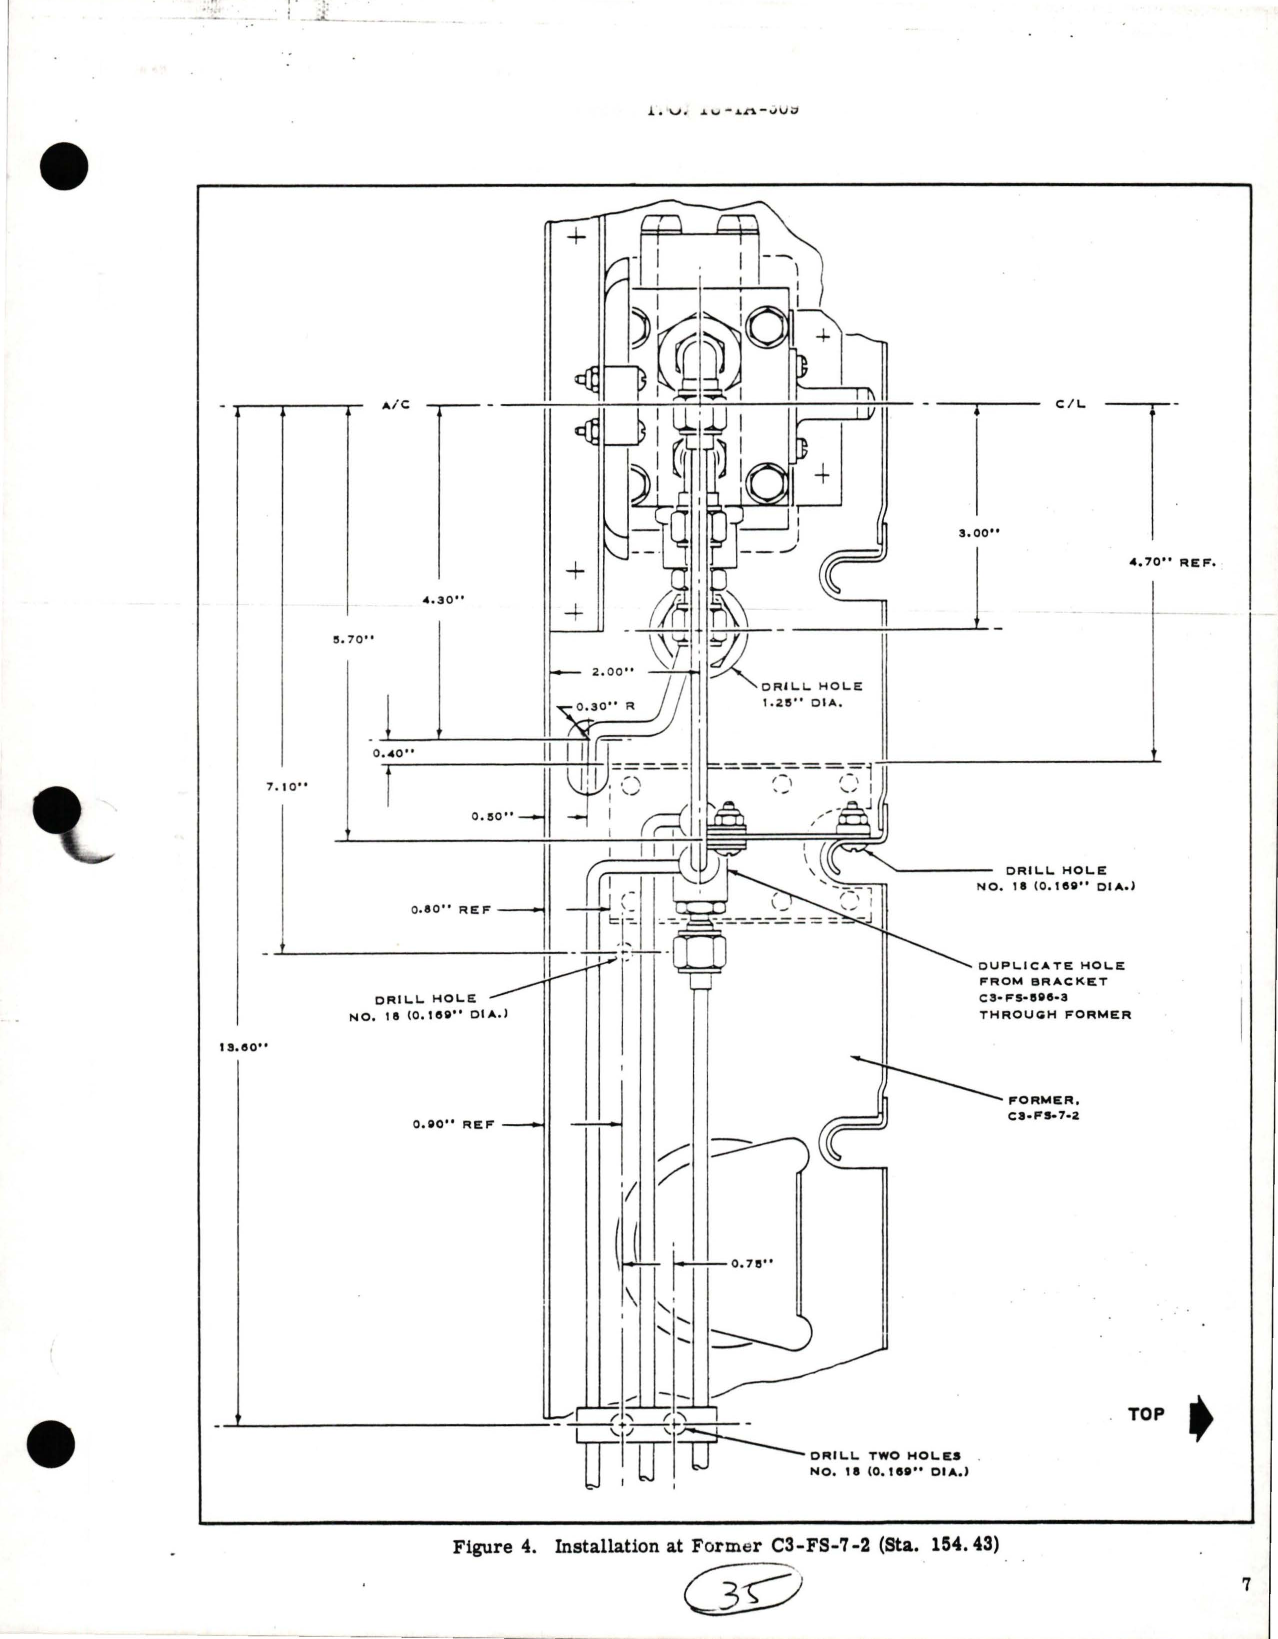 Sample page 7 from AirCorps Library document: Modification of Flap Hydraulic System for U-1A and YU-1